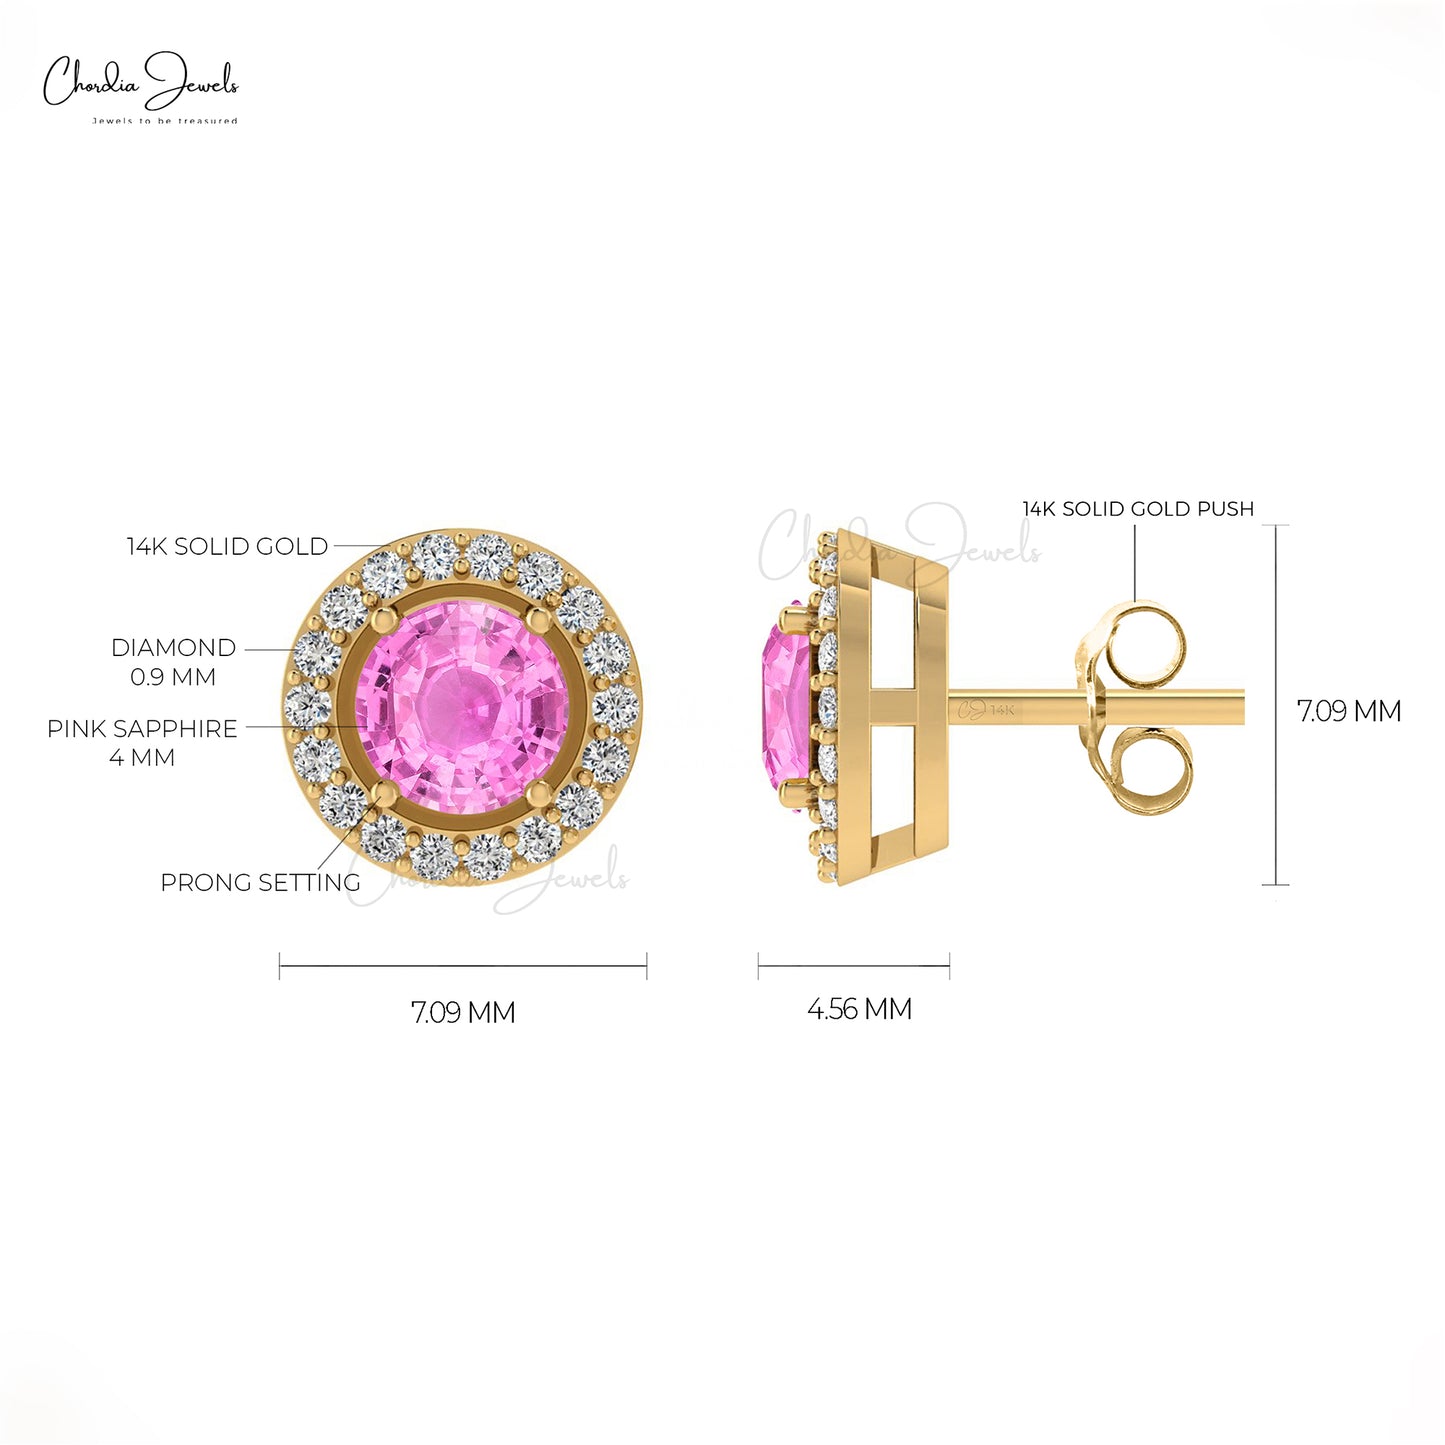 Natural Pink Sapphire Halo Earrings 14k Real Gold Diamond Prong Set Studs 4mm Round Cut Gemstone Vintage Fine Jewelry For Her